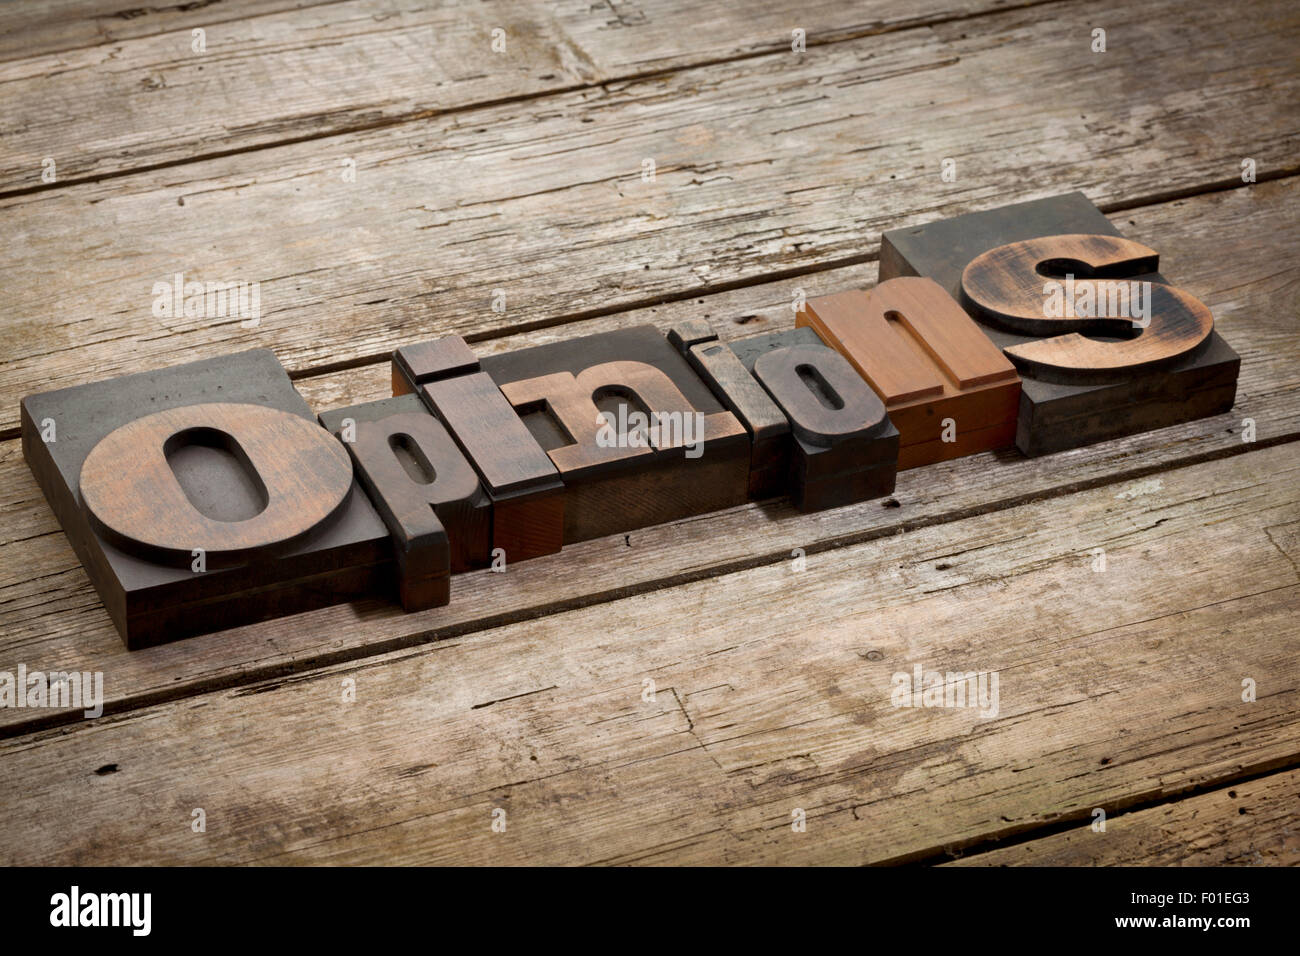 opinions, word written with vintage letterpress printing blocks, angled view, rustic wooden background Stock Photo